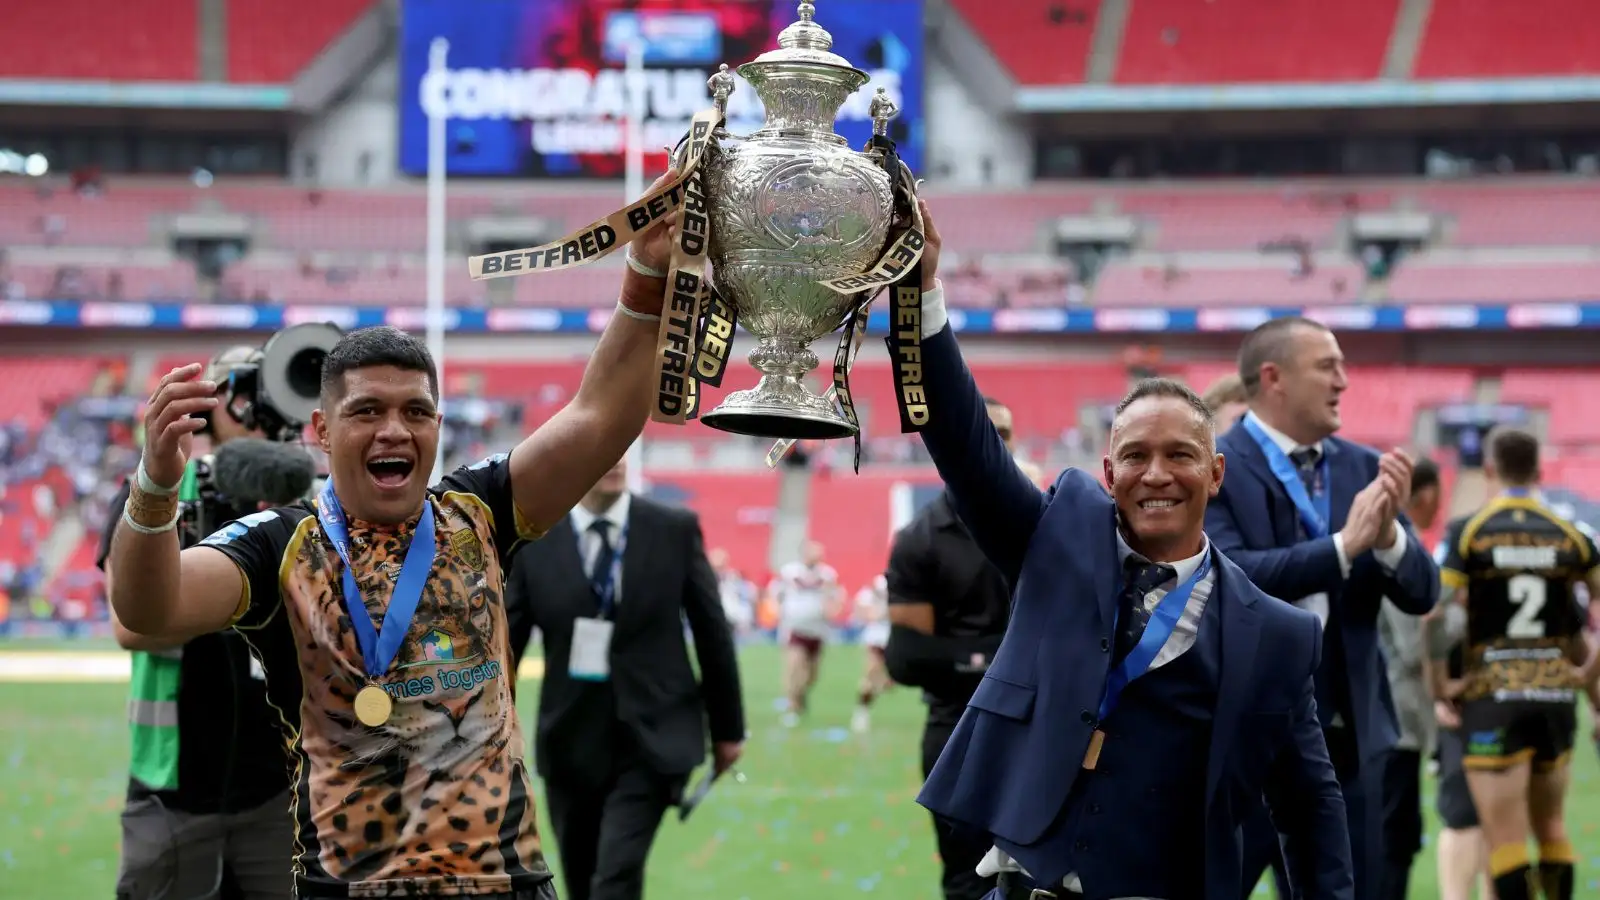 Emotional Adrian Lam hails ‘weird’ and ‘special’ moment in Challenge Cup final: ‘It was an incredible finish’